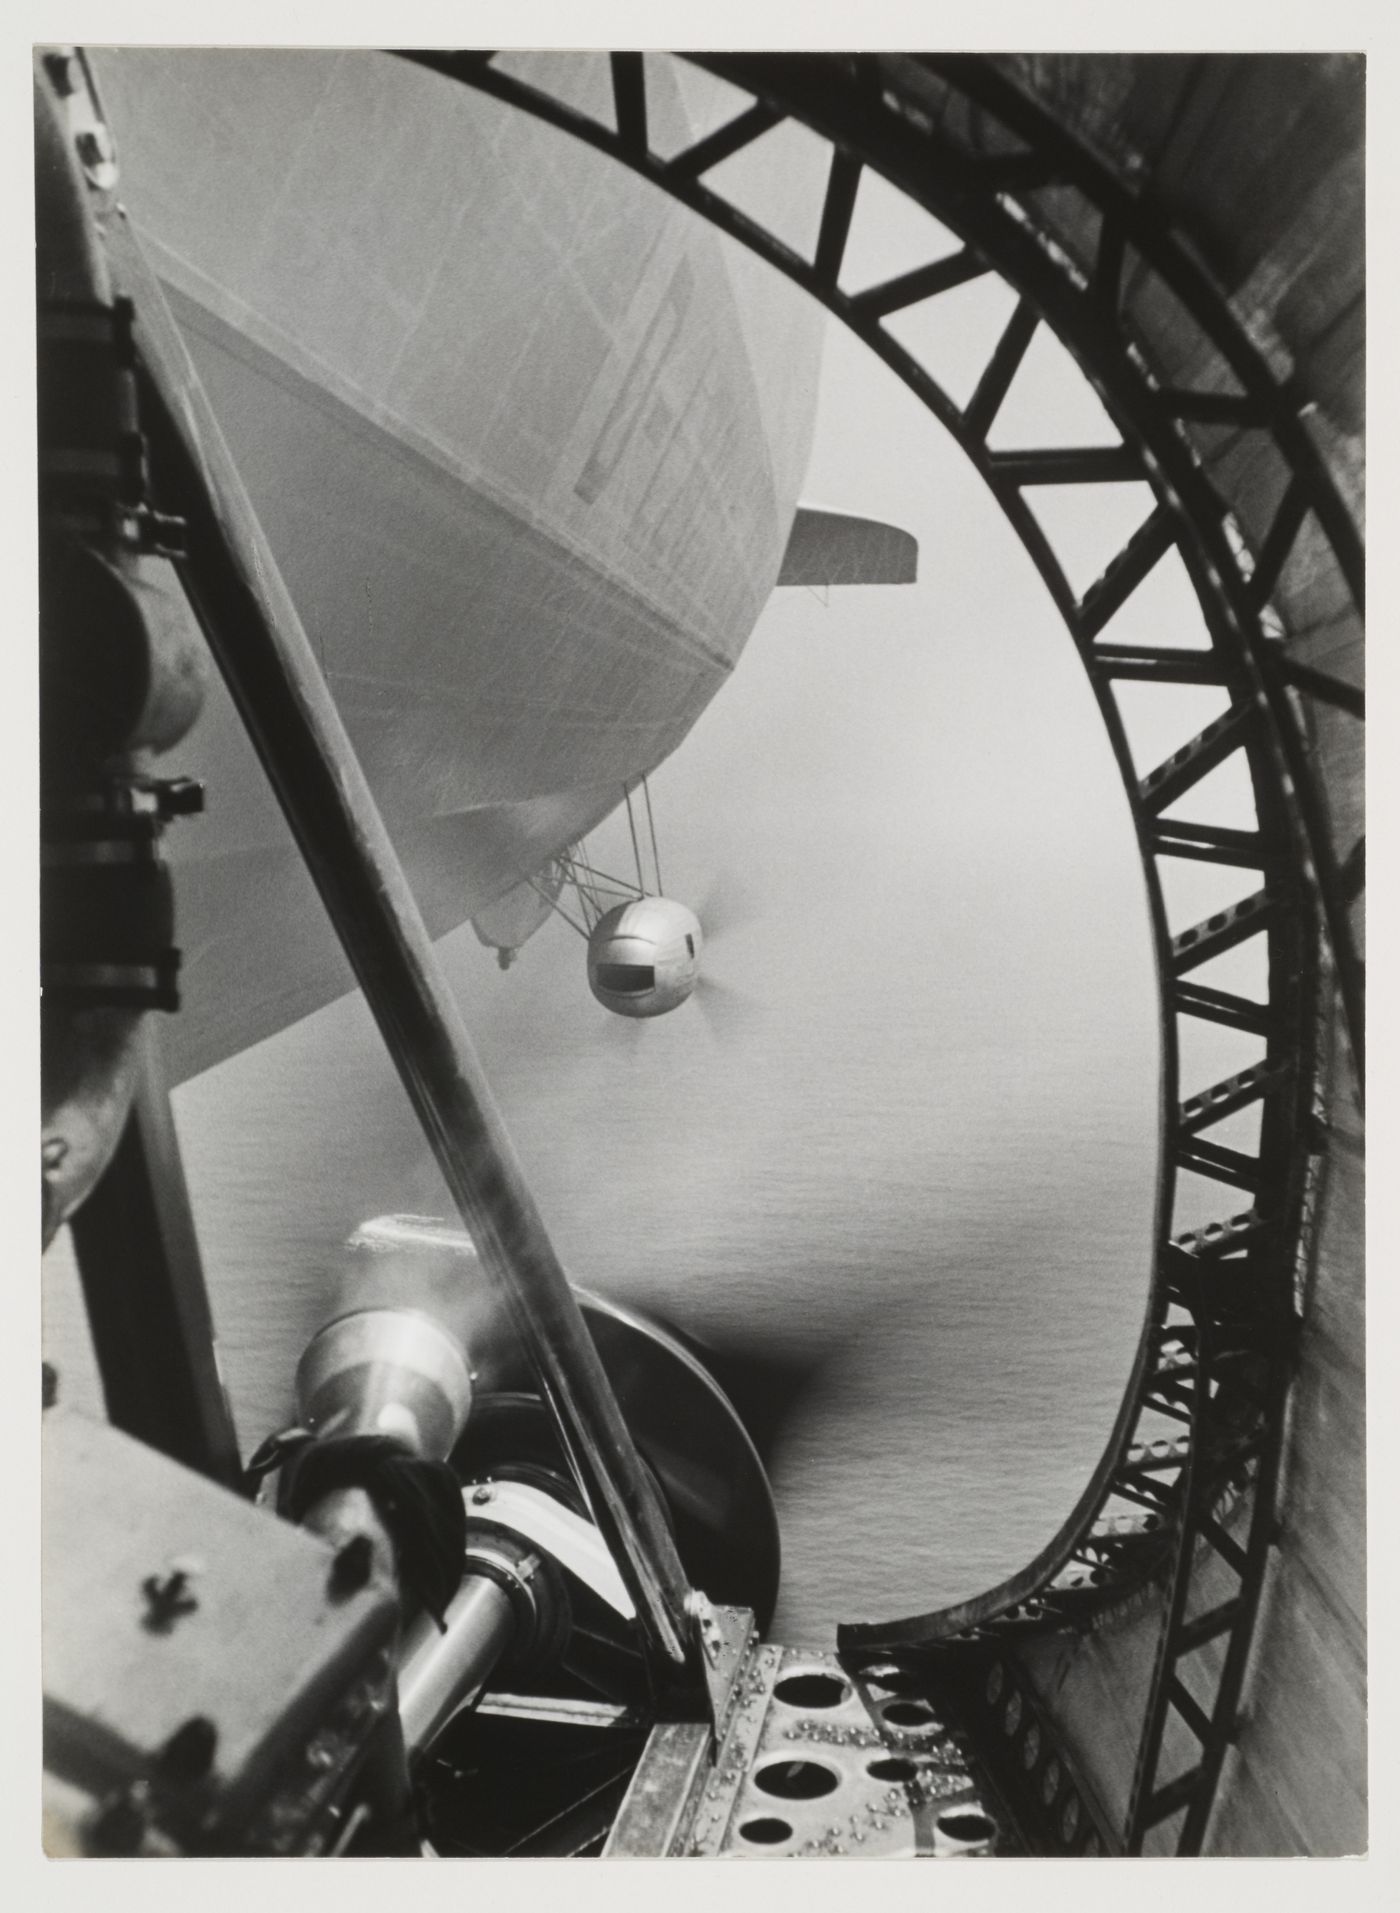 View of a zeppelin in flight from the rear propellor duct